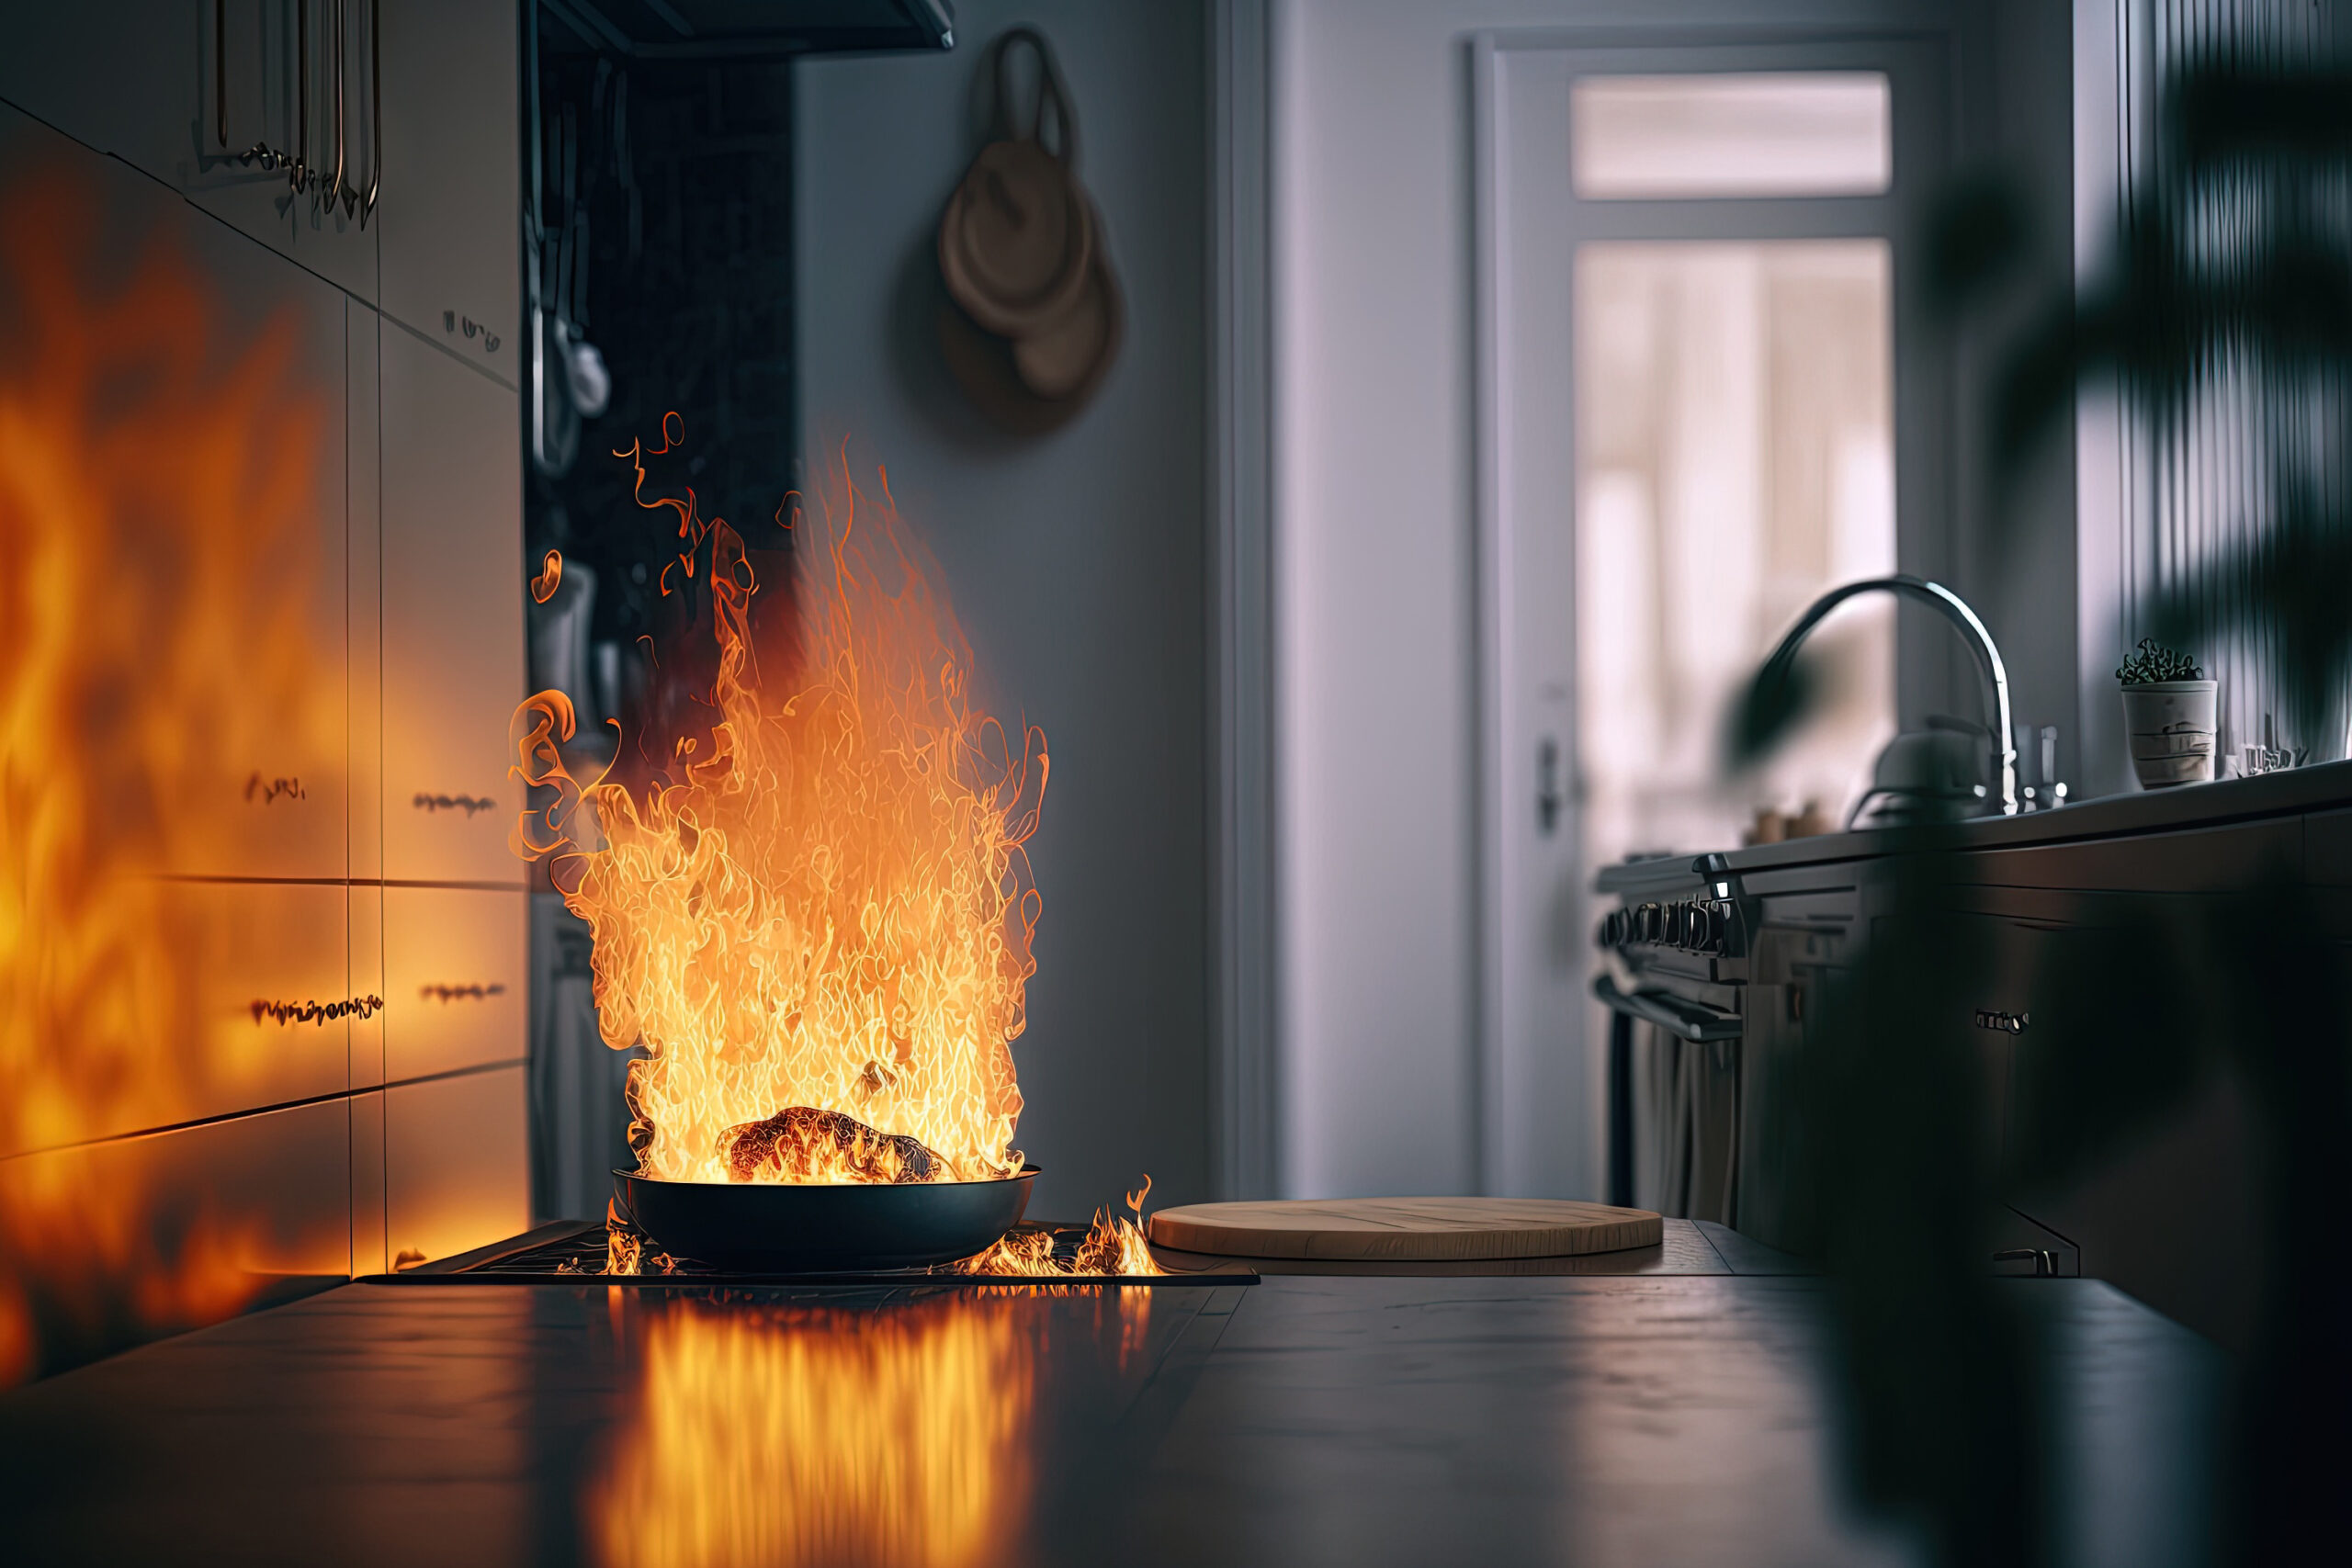 A kitchen stove with a pot on fire.